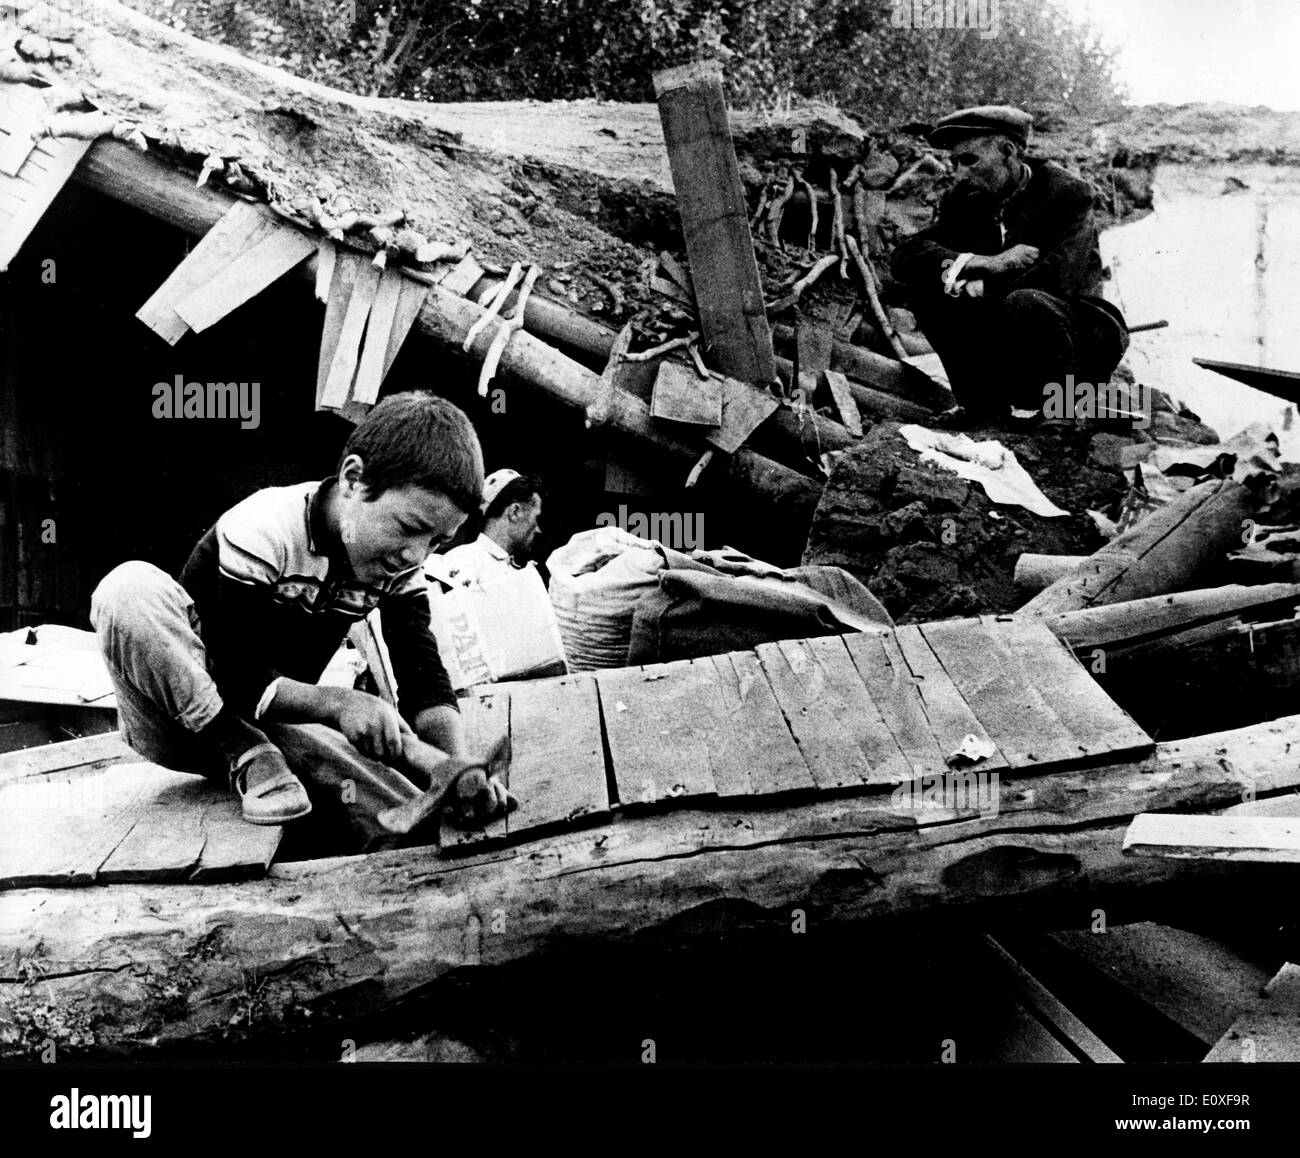 Natural disasters Black and White Stock Photos & Images - Alamy